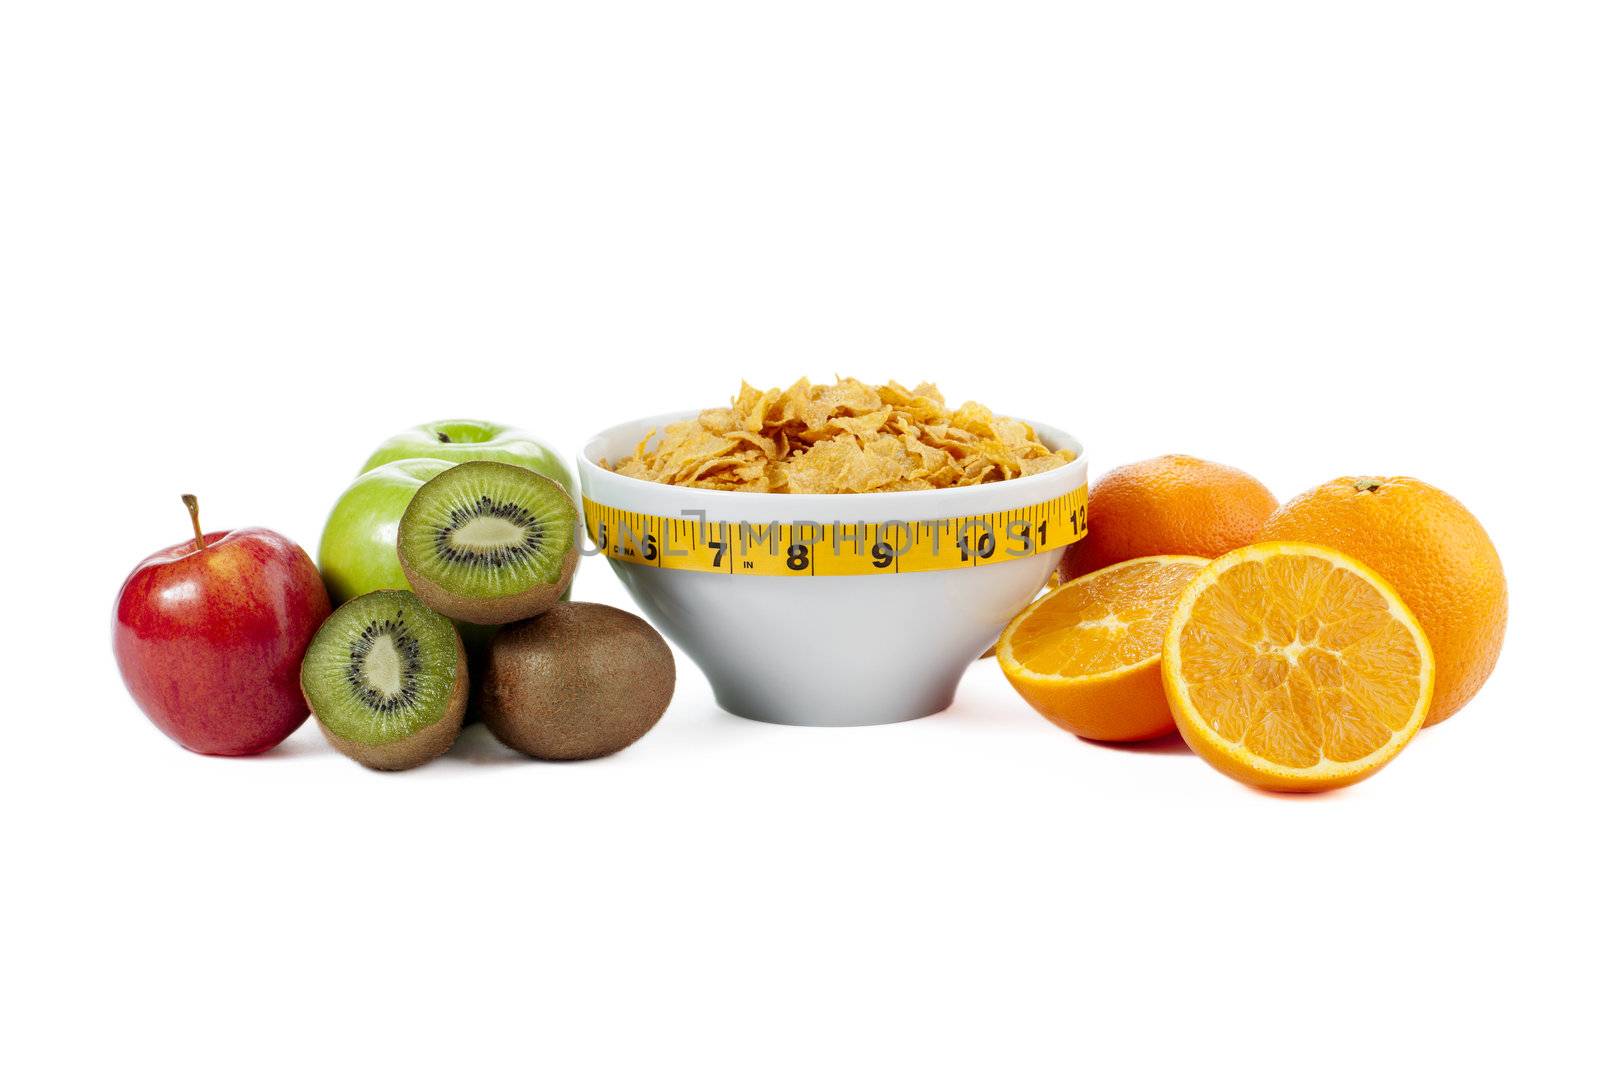 Bowl of cereals together with an apple, kiwi fruit and orange slices